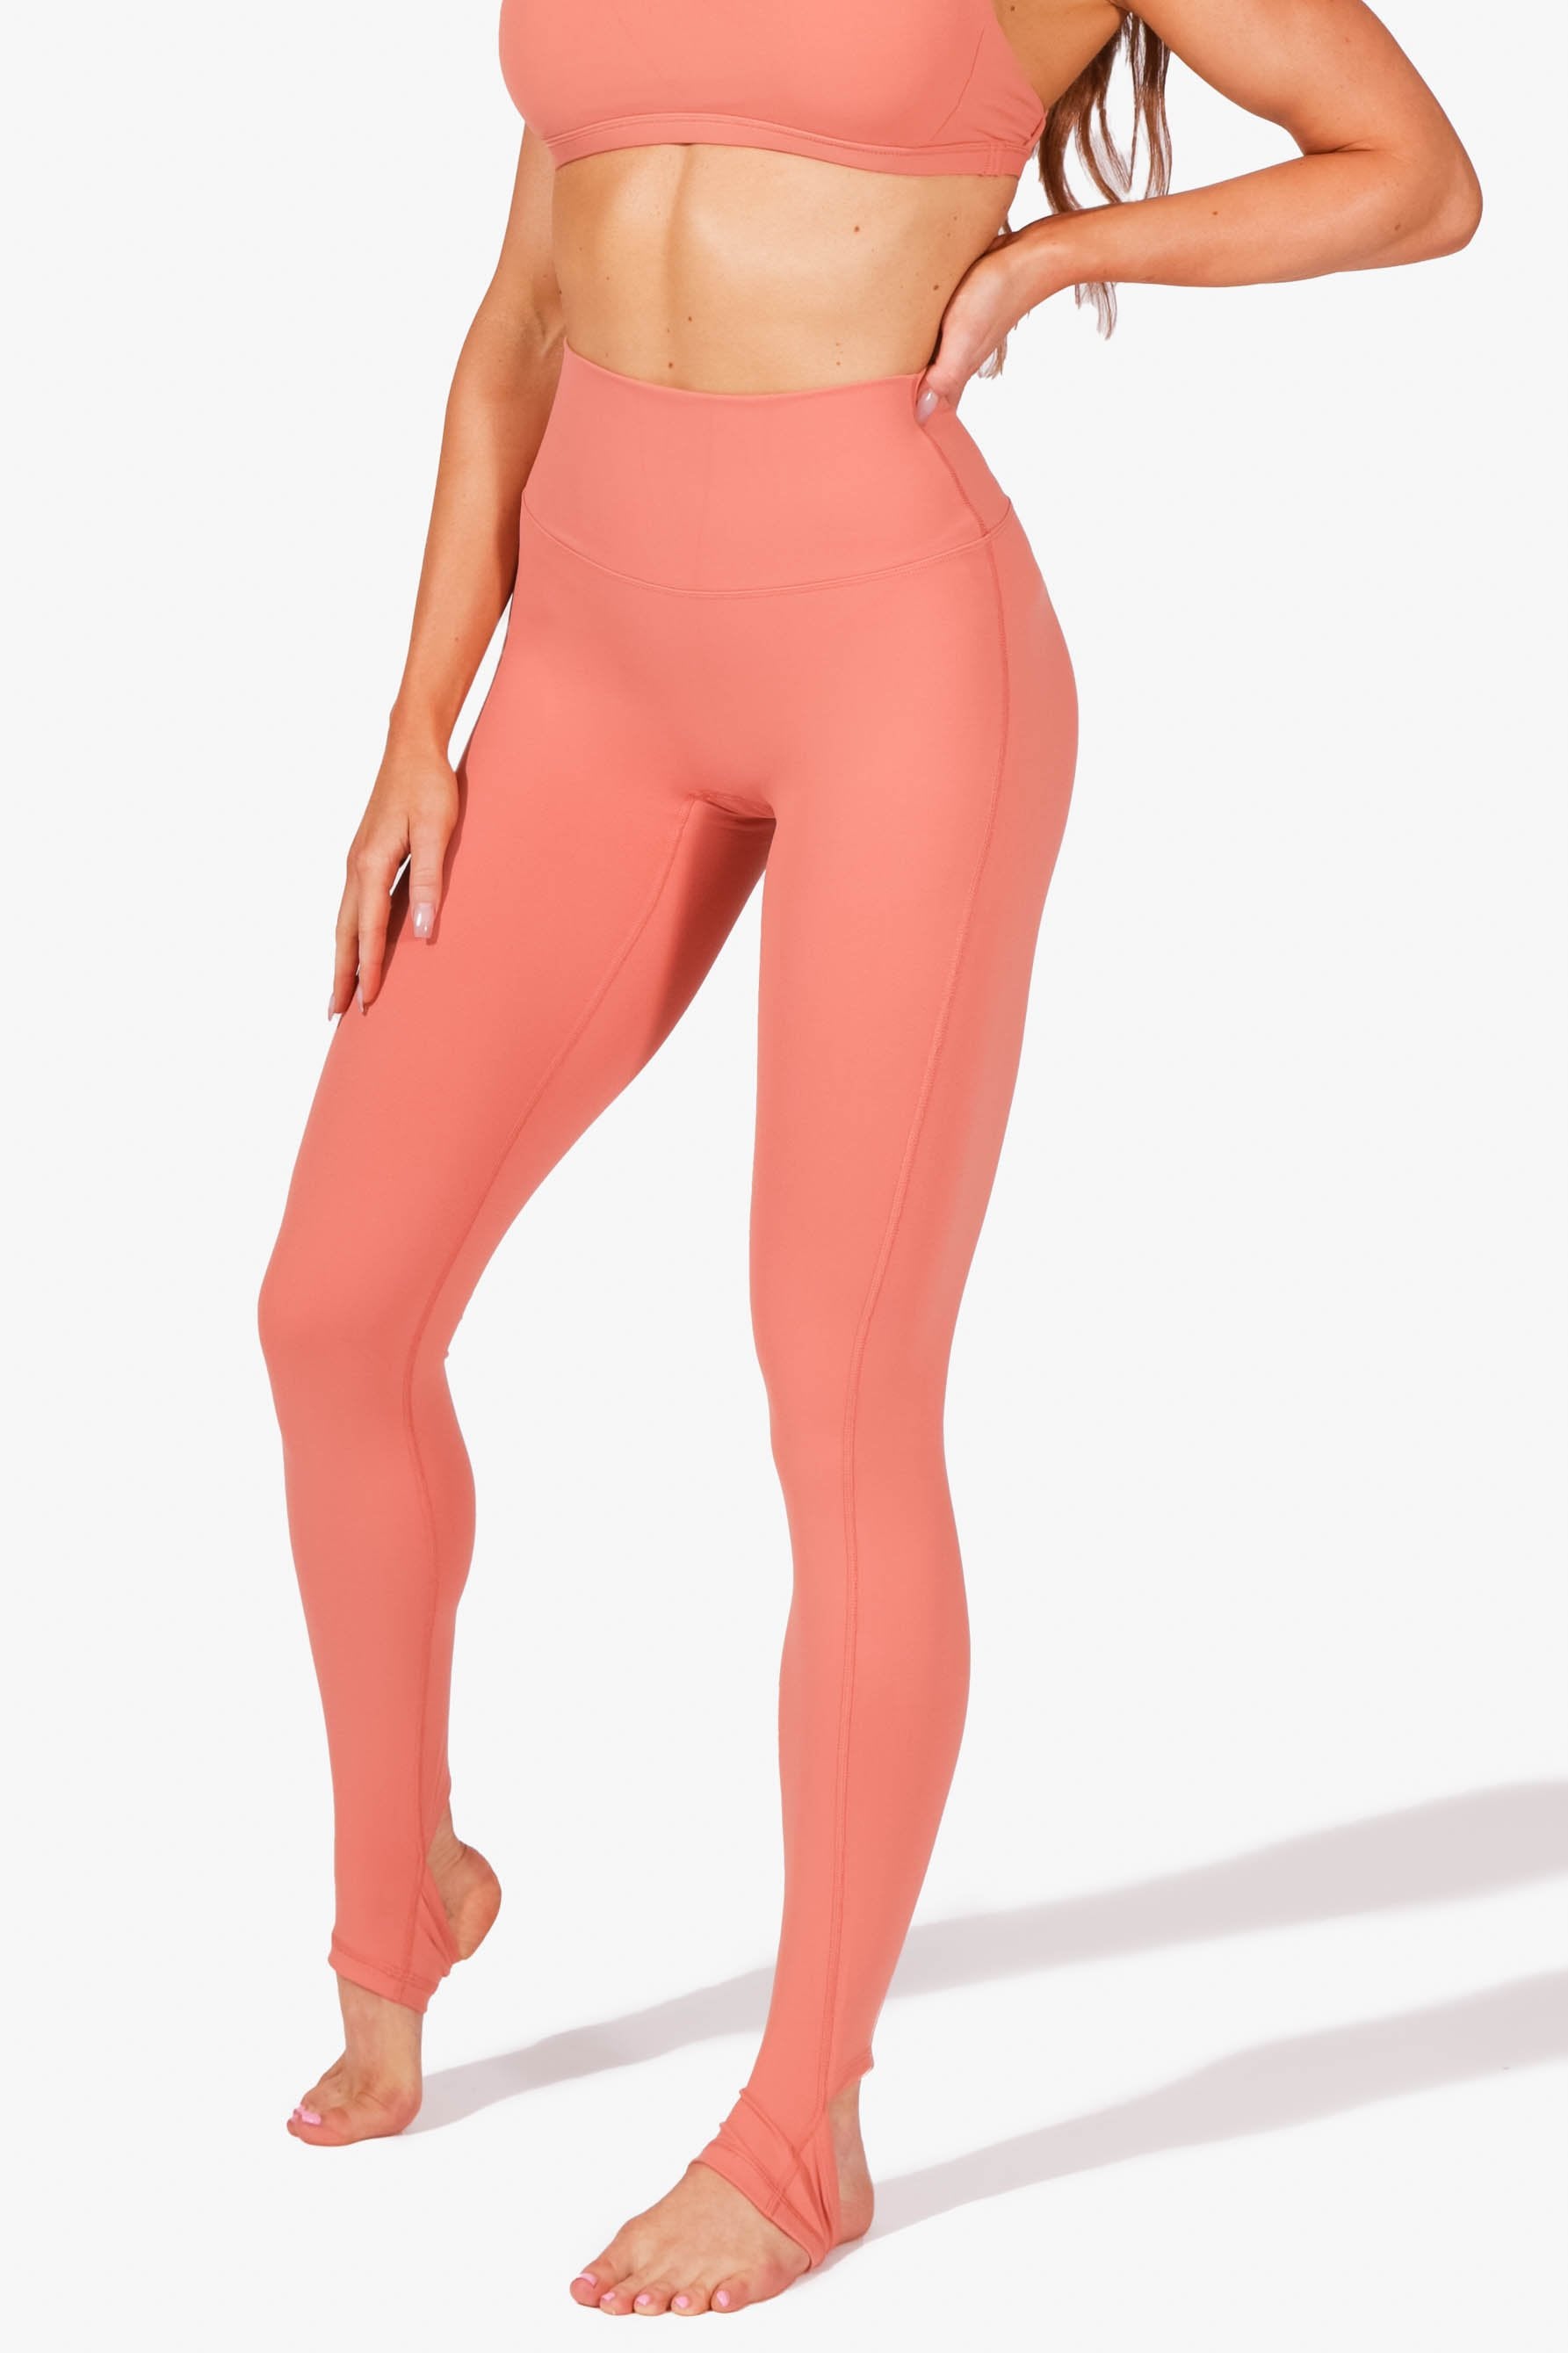 Women's Seamless Leggings & Bras, Jed North, Fitness Gym Yoga – Page 2